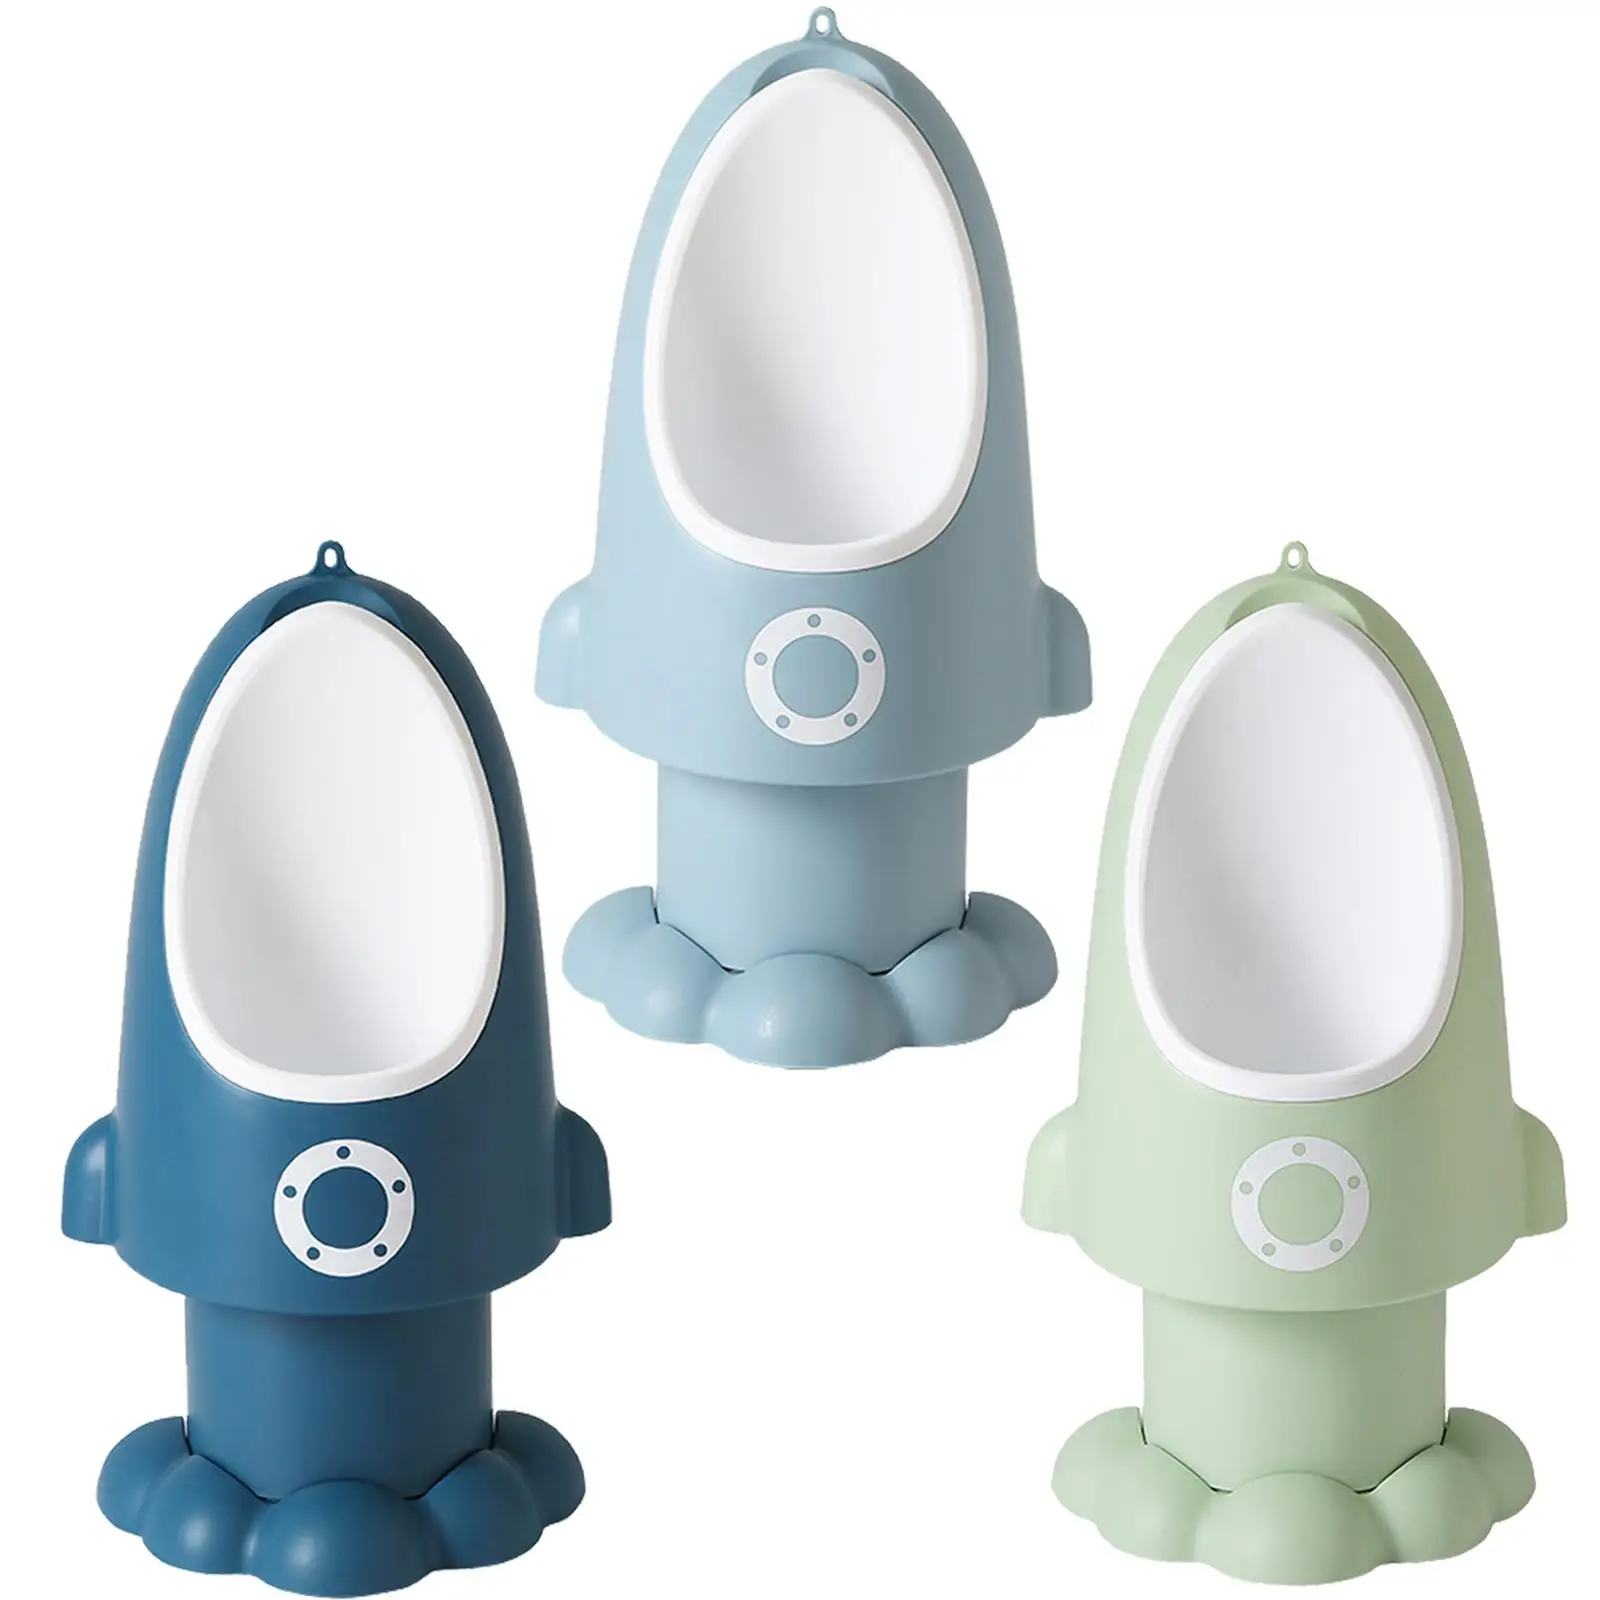 Wall Mounted Training Urinal Hanging Pee Trainer Pee Training for Children